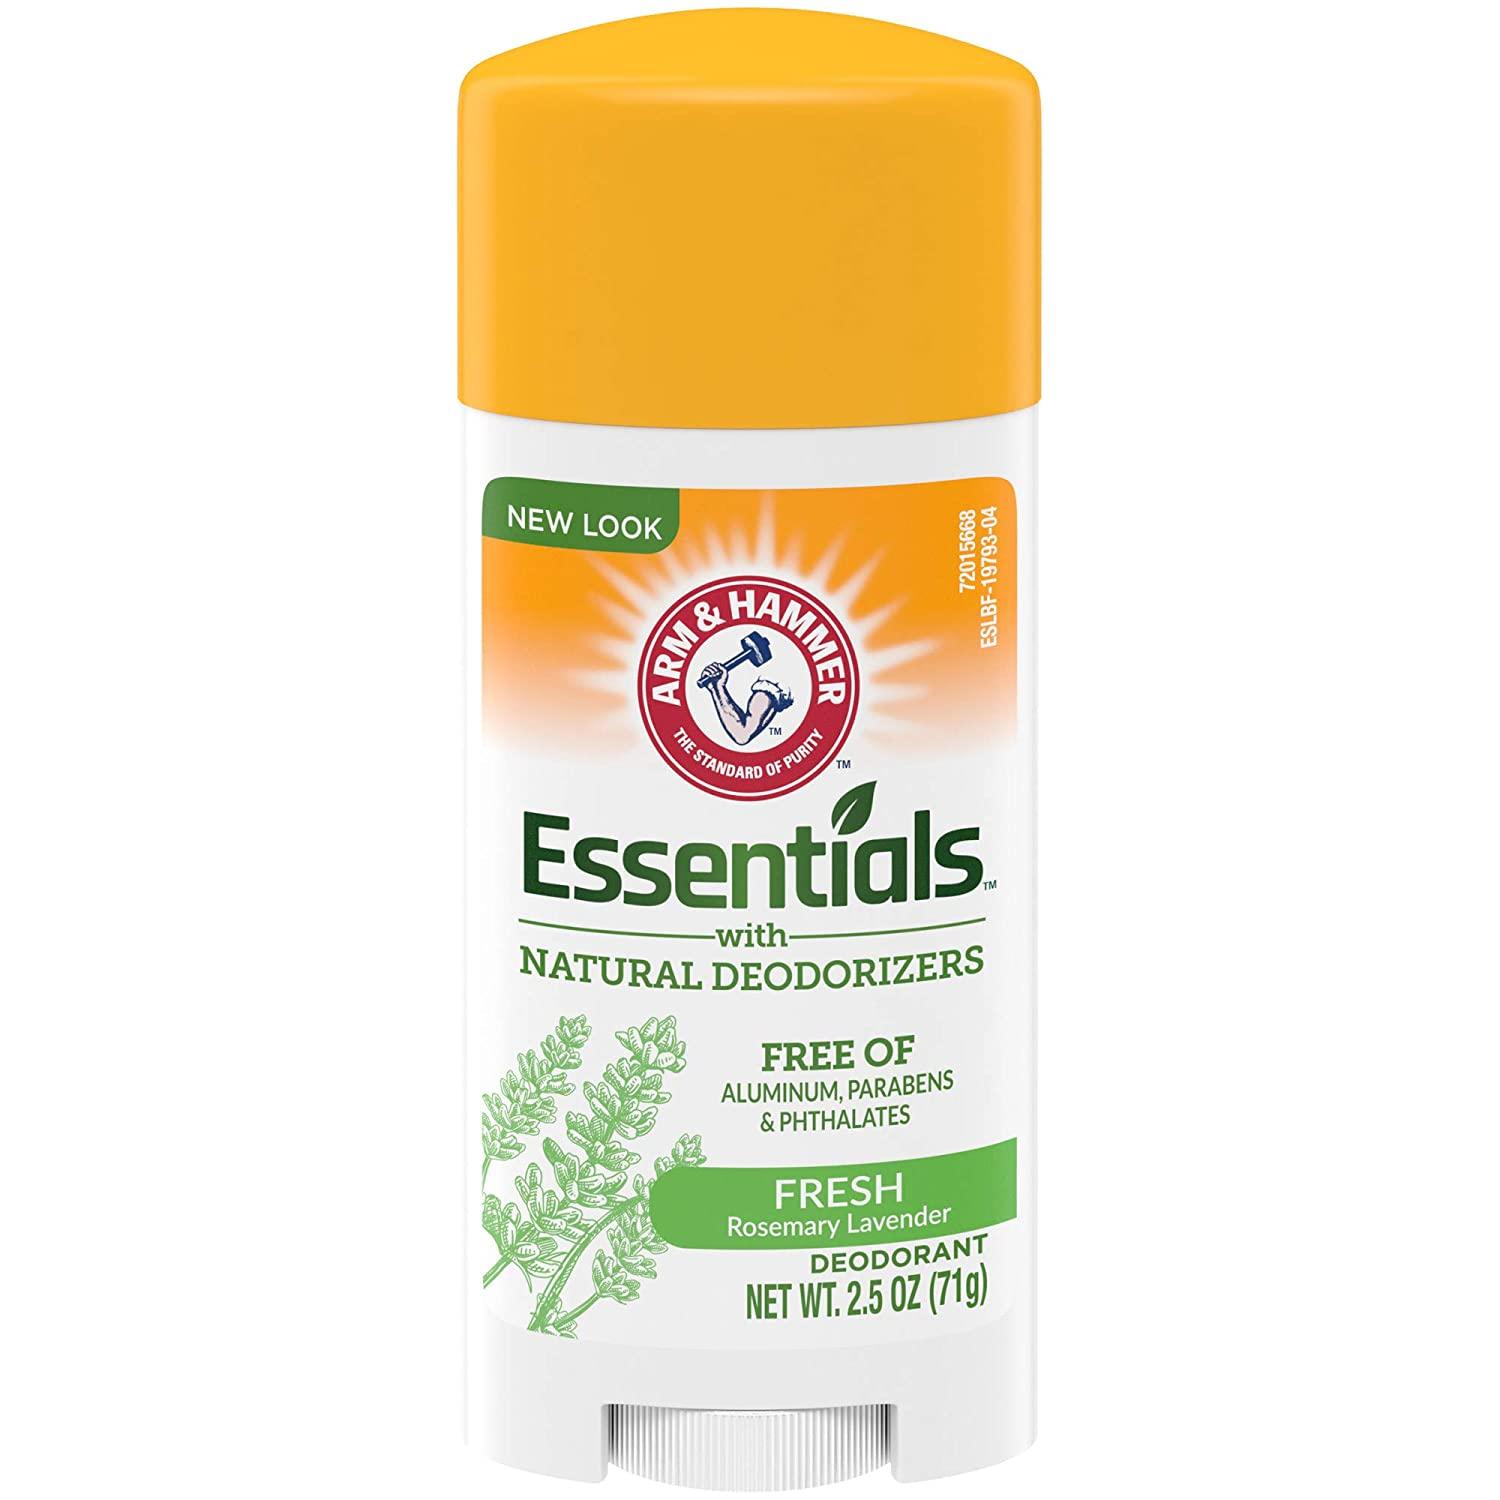 Arm and Hammer Essentials Deodorant for $1.19 Shipped